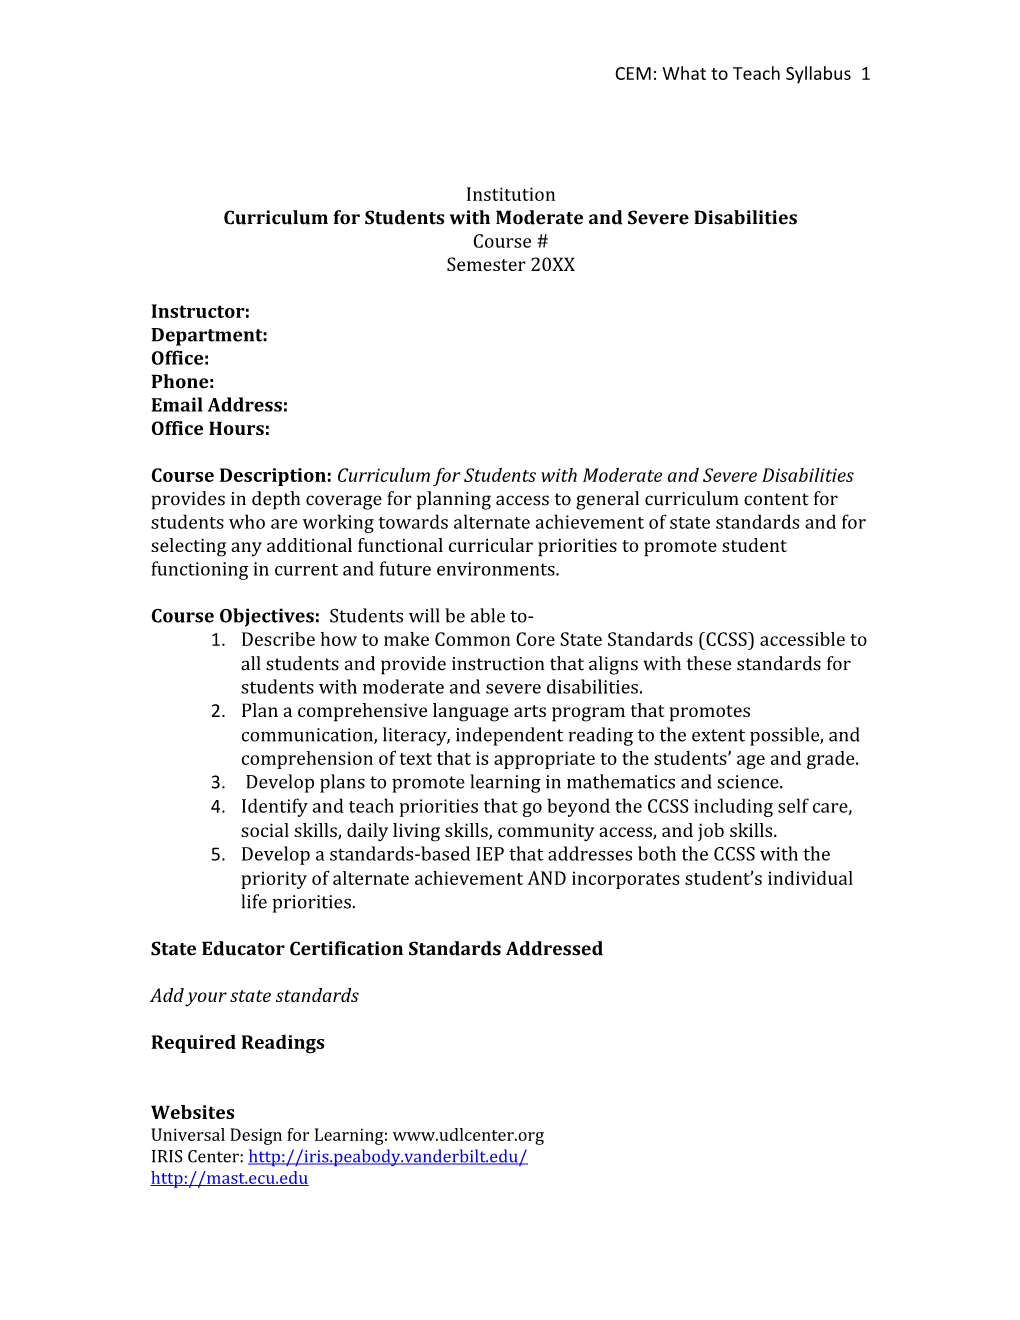 Curriculum for Students with Moderate and Severe Disabilities